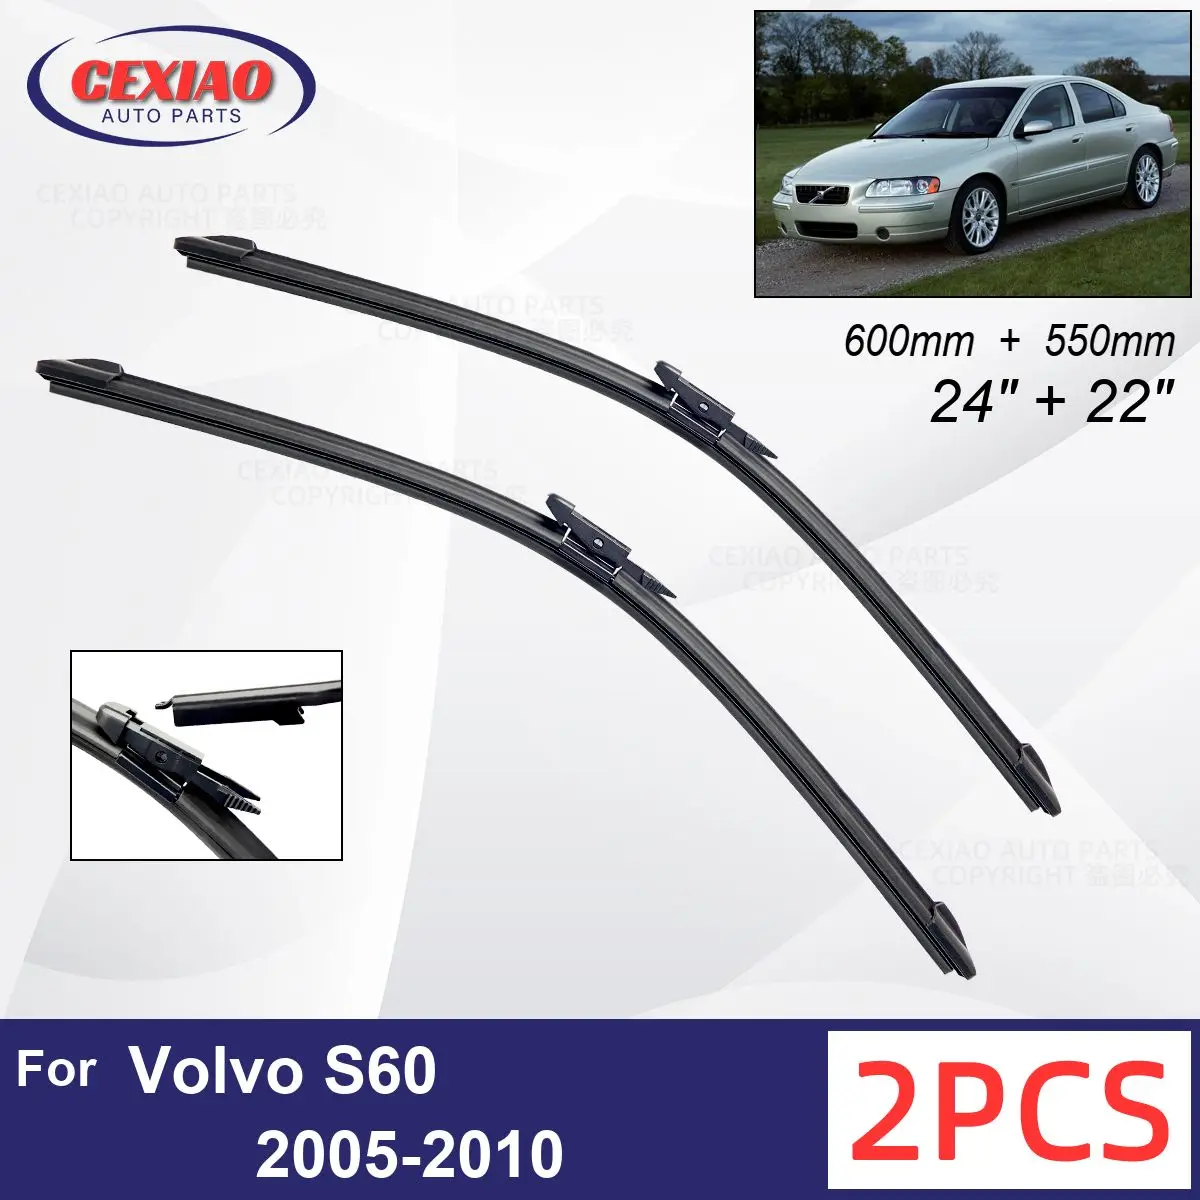 

Car Wiper For Volvo S60 2005-2010 Front Wiper Blades Soft Rubber Windscreen Wipers Auto Windshield 24"+22" 600mm + 550mm